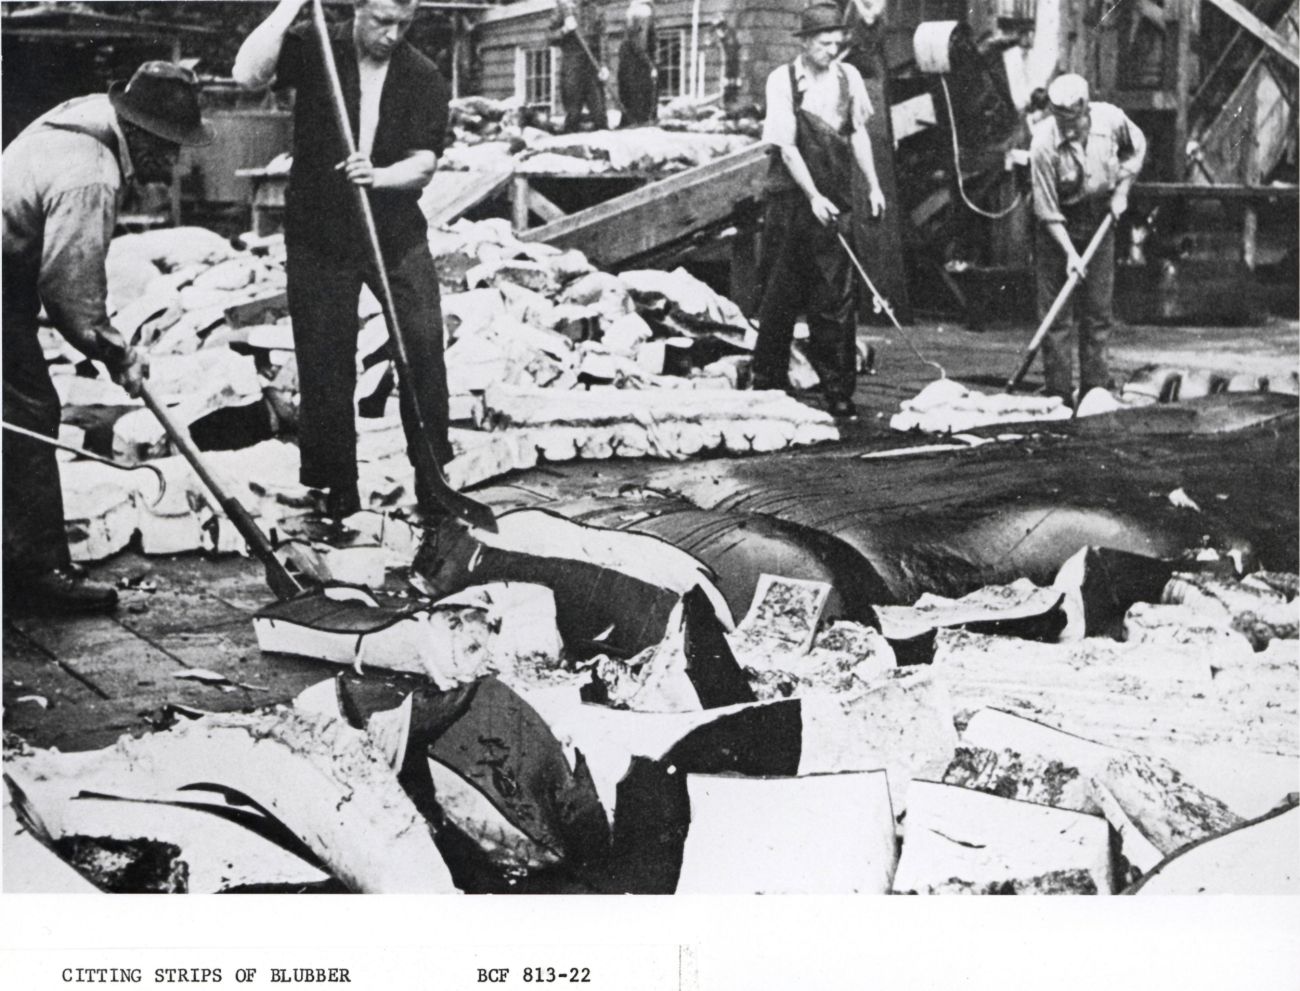 Cutting strips of blubber after a whale is brought to a shore processingfacility